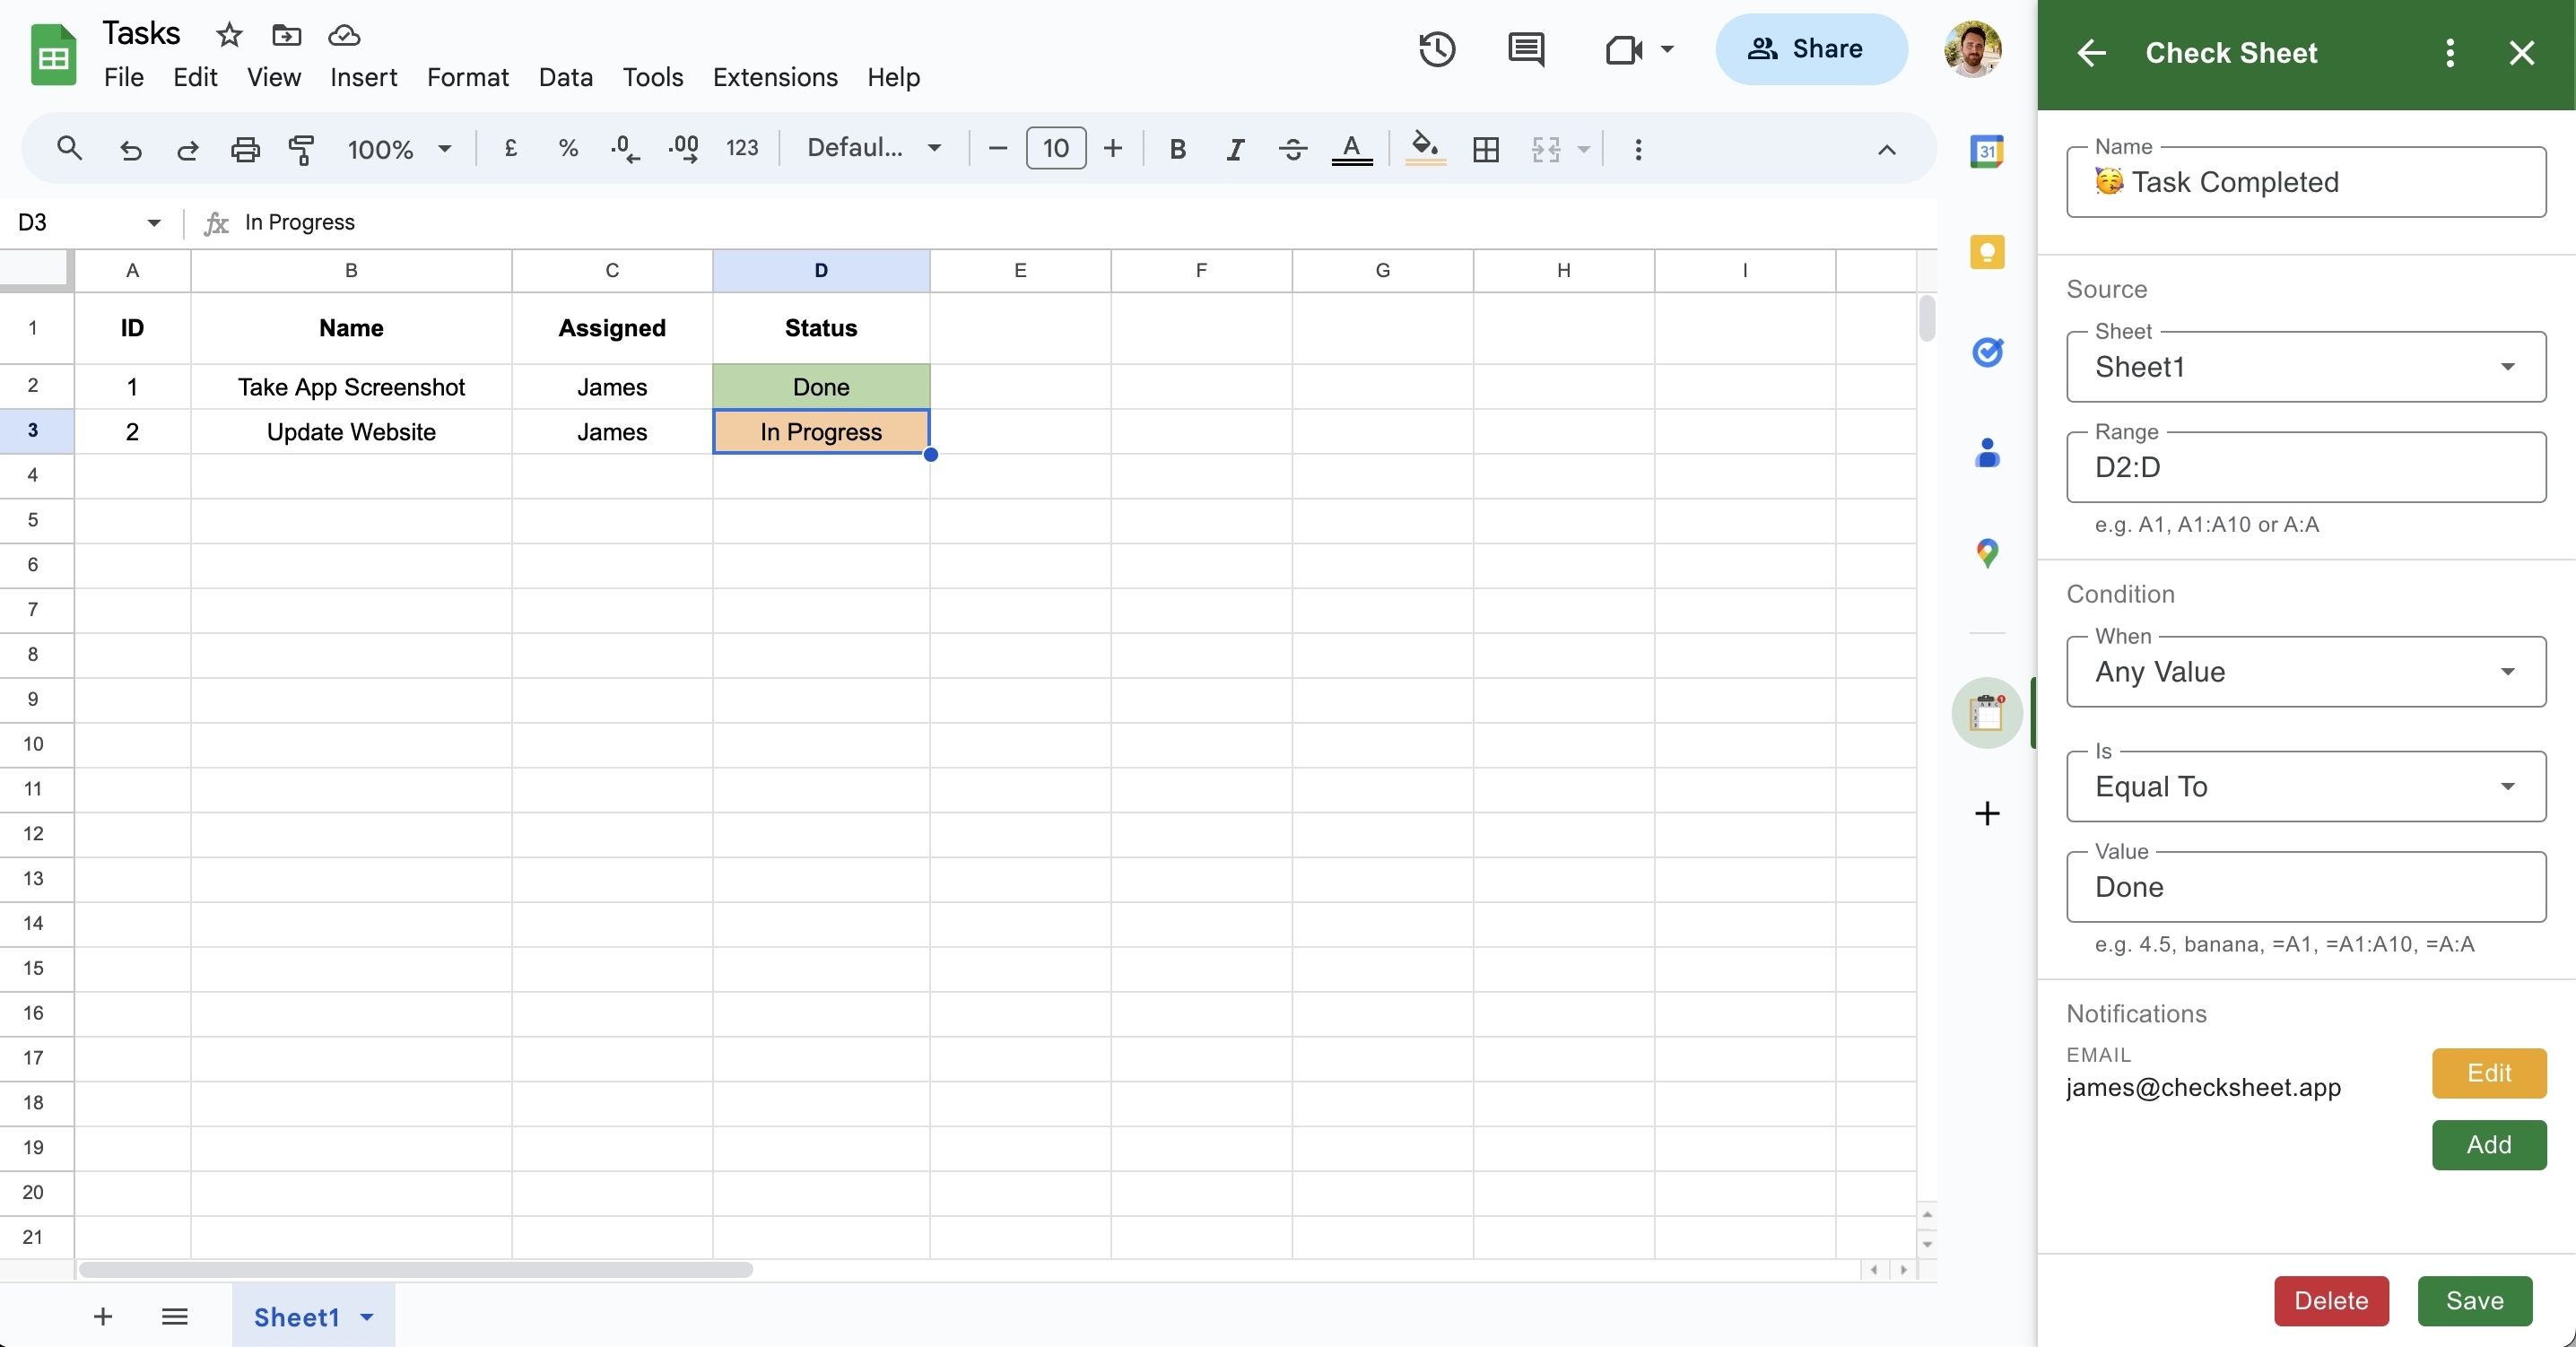 Screenshot showing a Google Sheet with a Check that sends a notification when a task is completed